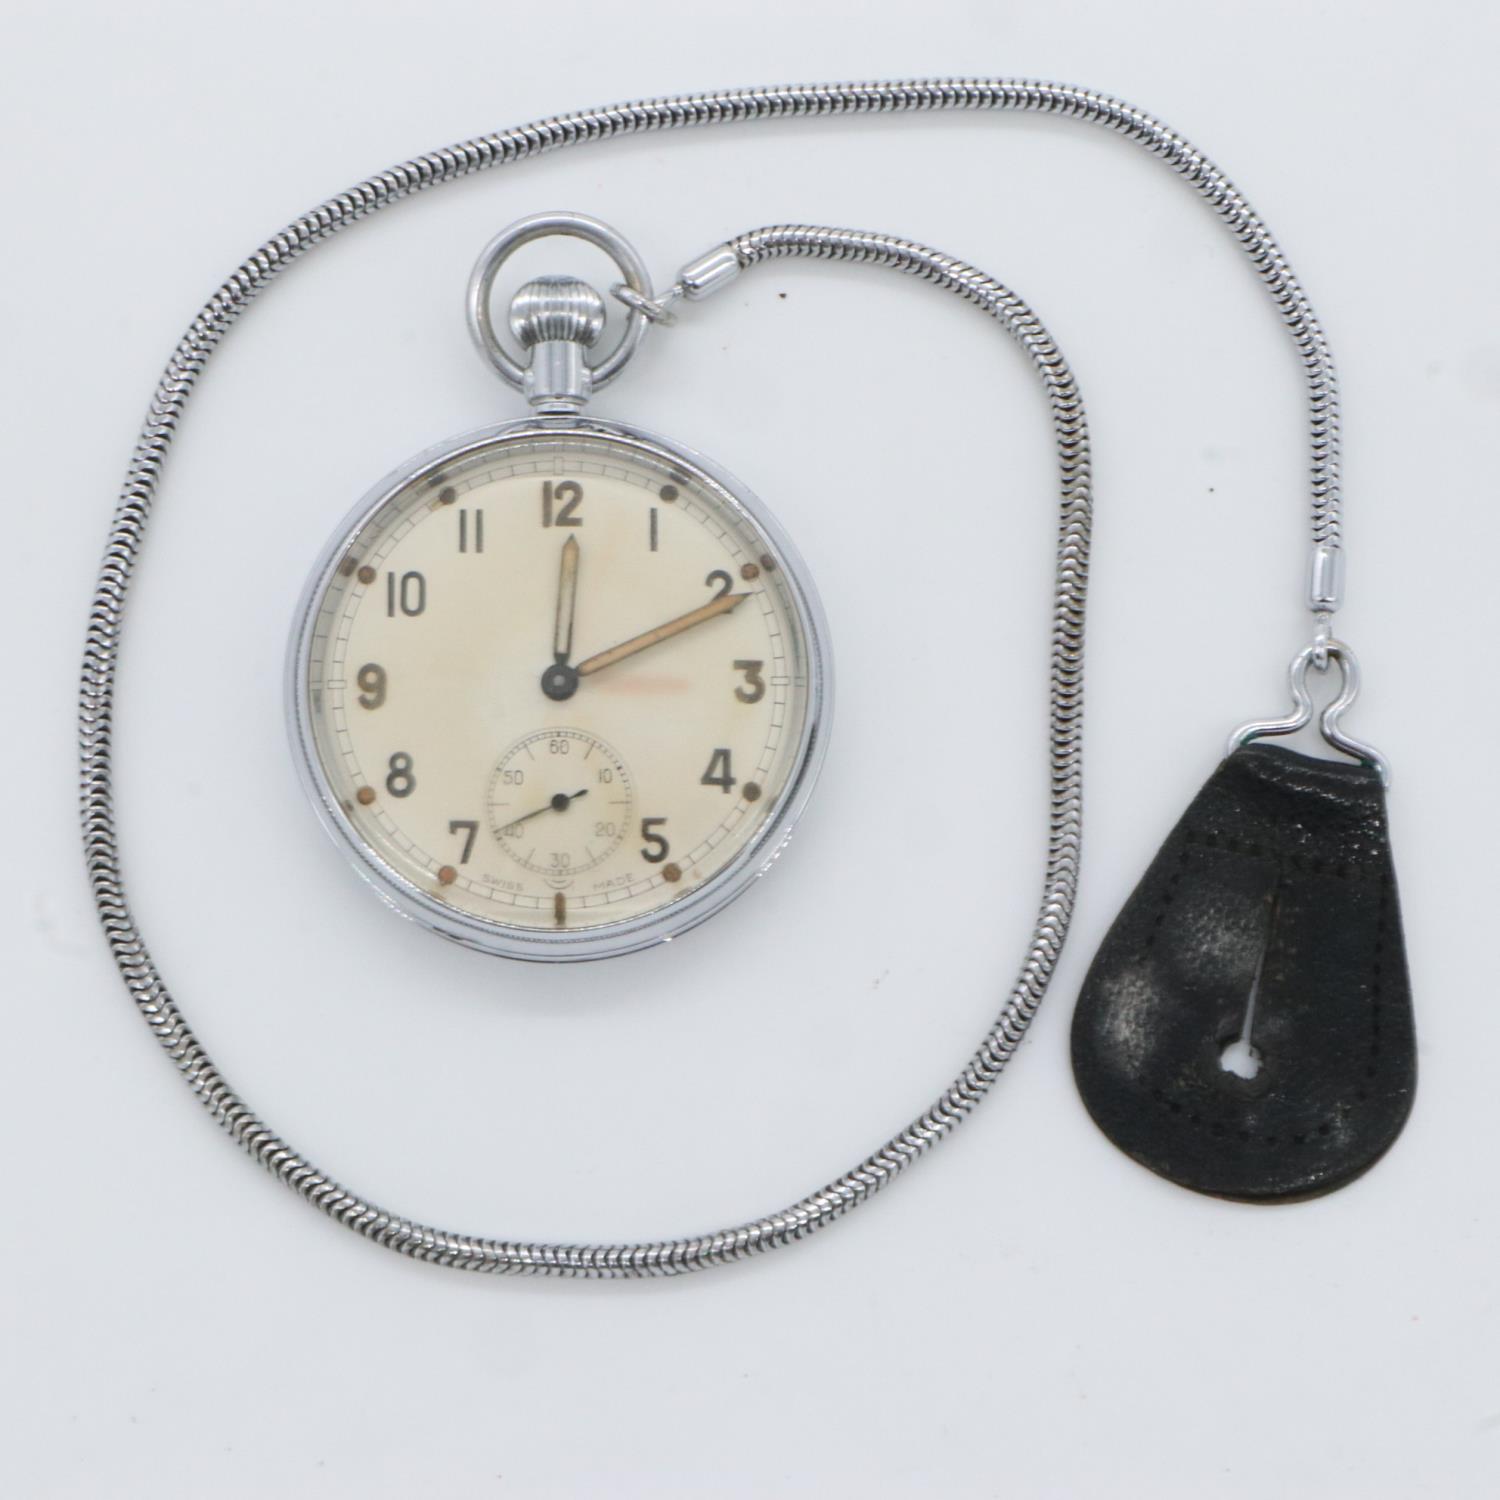 British WWII military issue chromium cased crown wind pocket watch, numbered verso Q17526, with